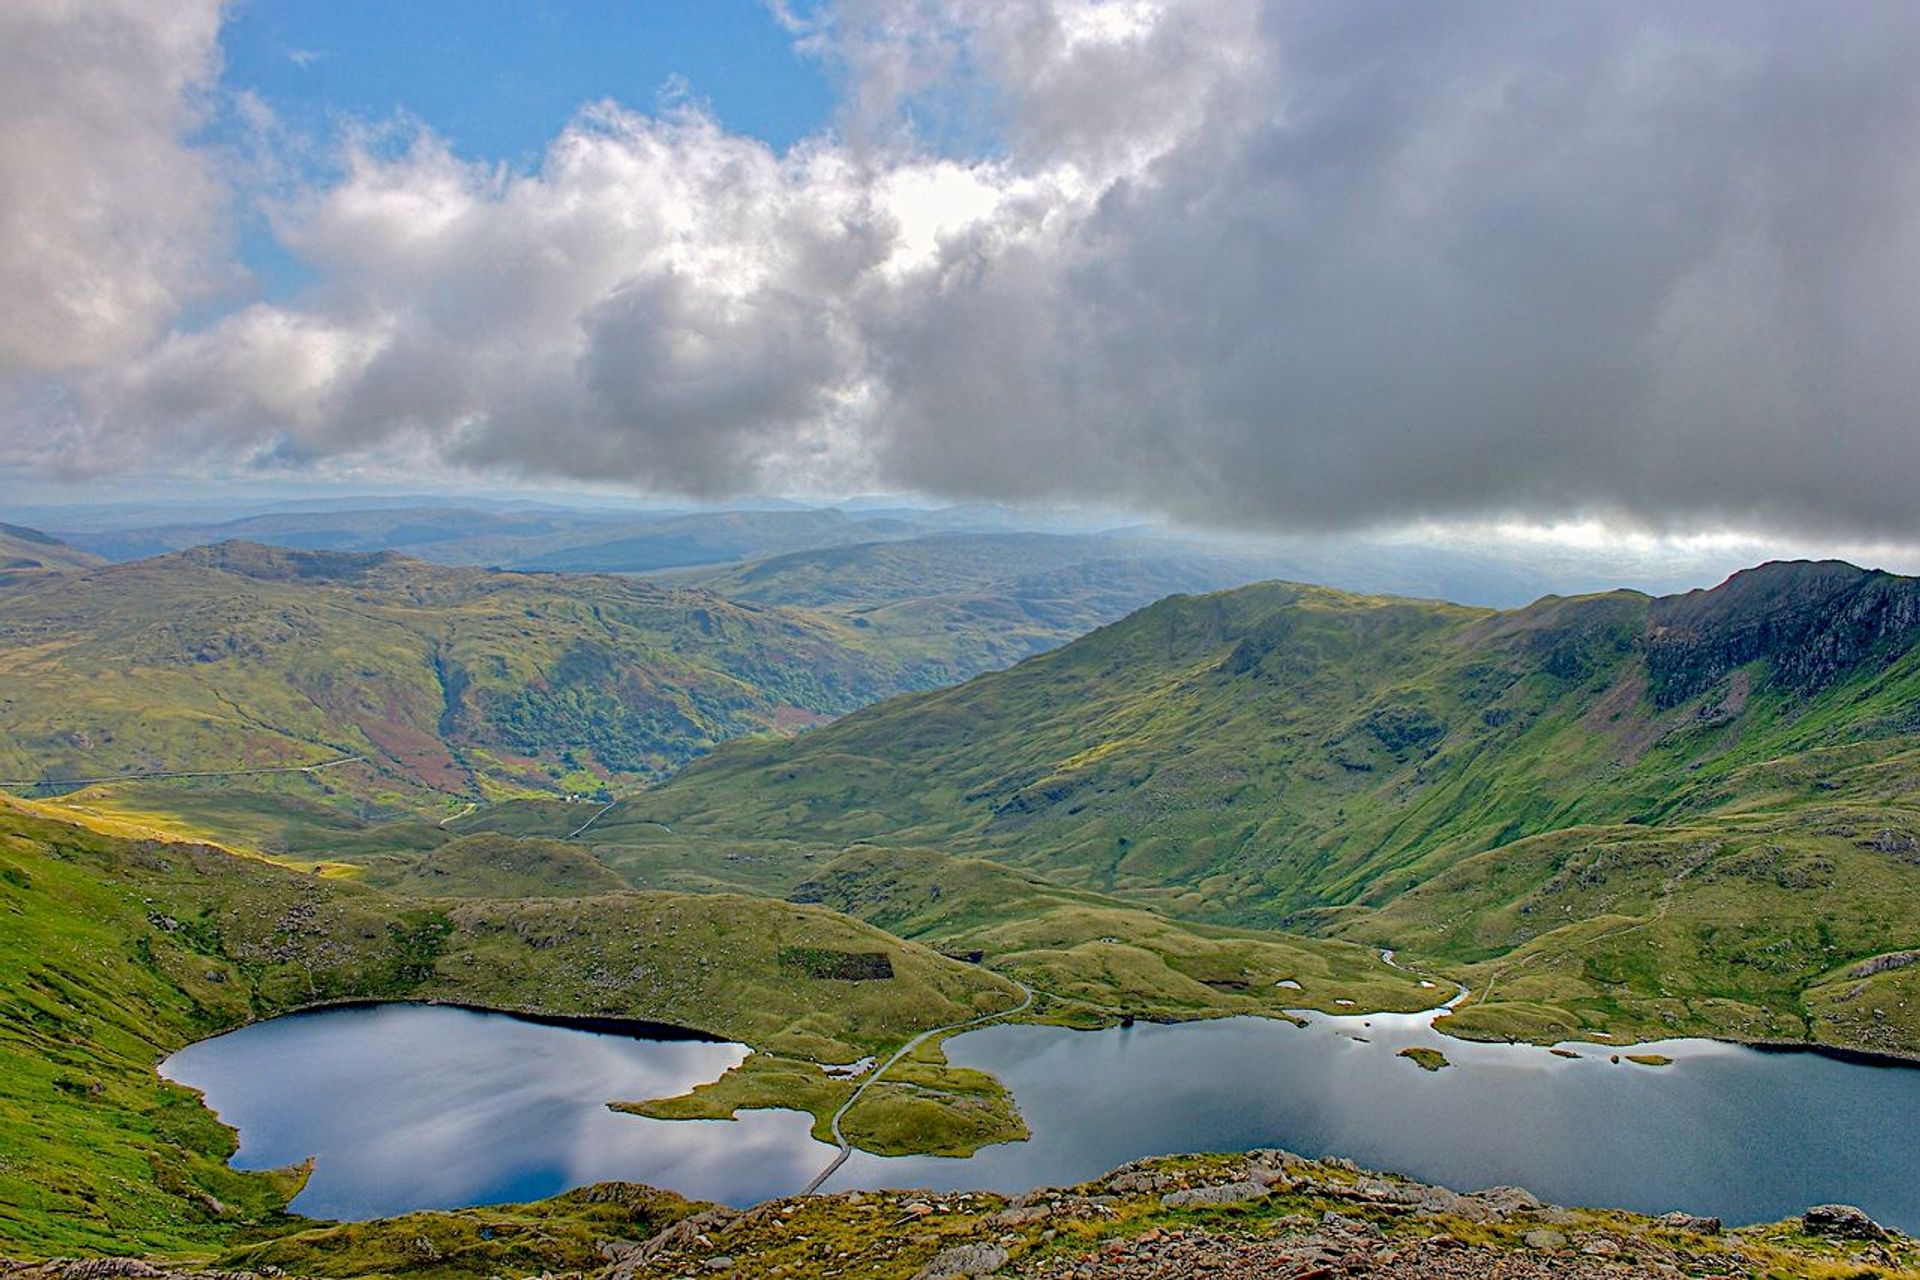 Looking out from the approach to Crib Goch from Pen Y Pas, over Llyn Llydaw (photo credits: Mike Peel)